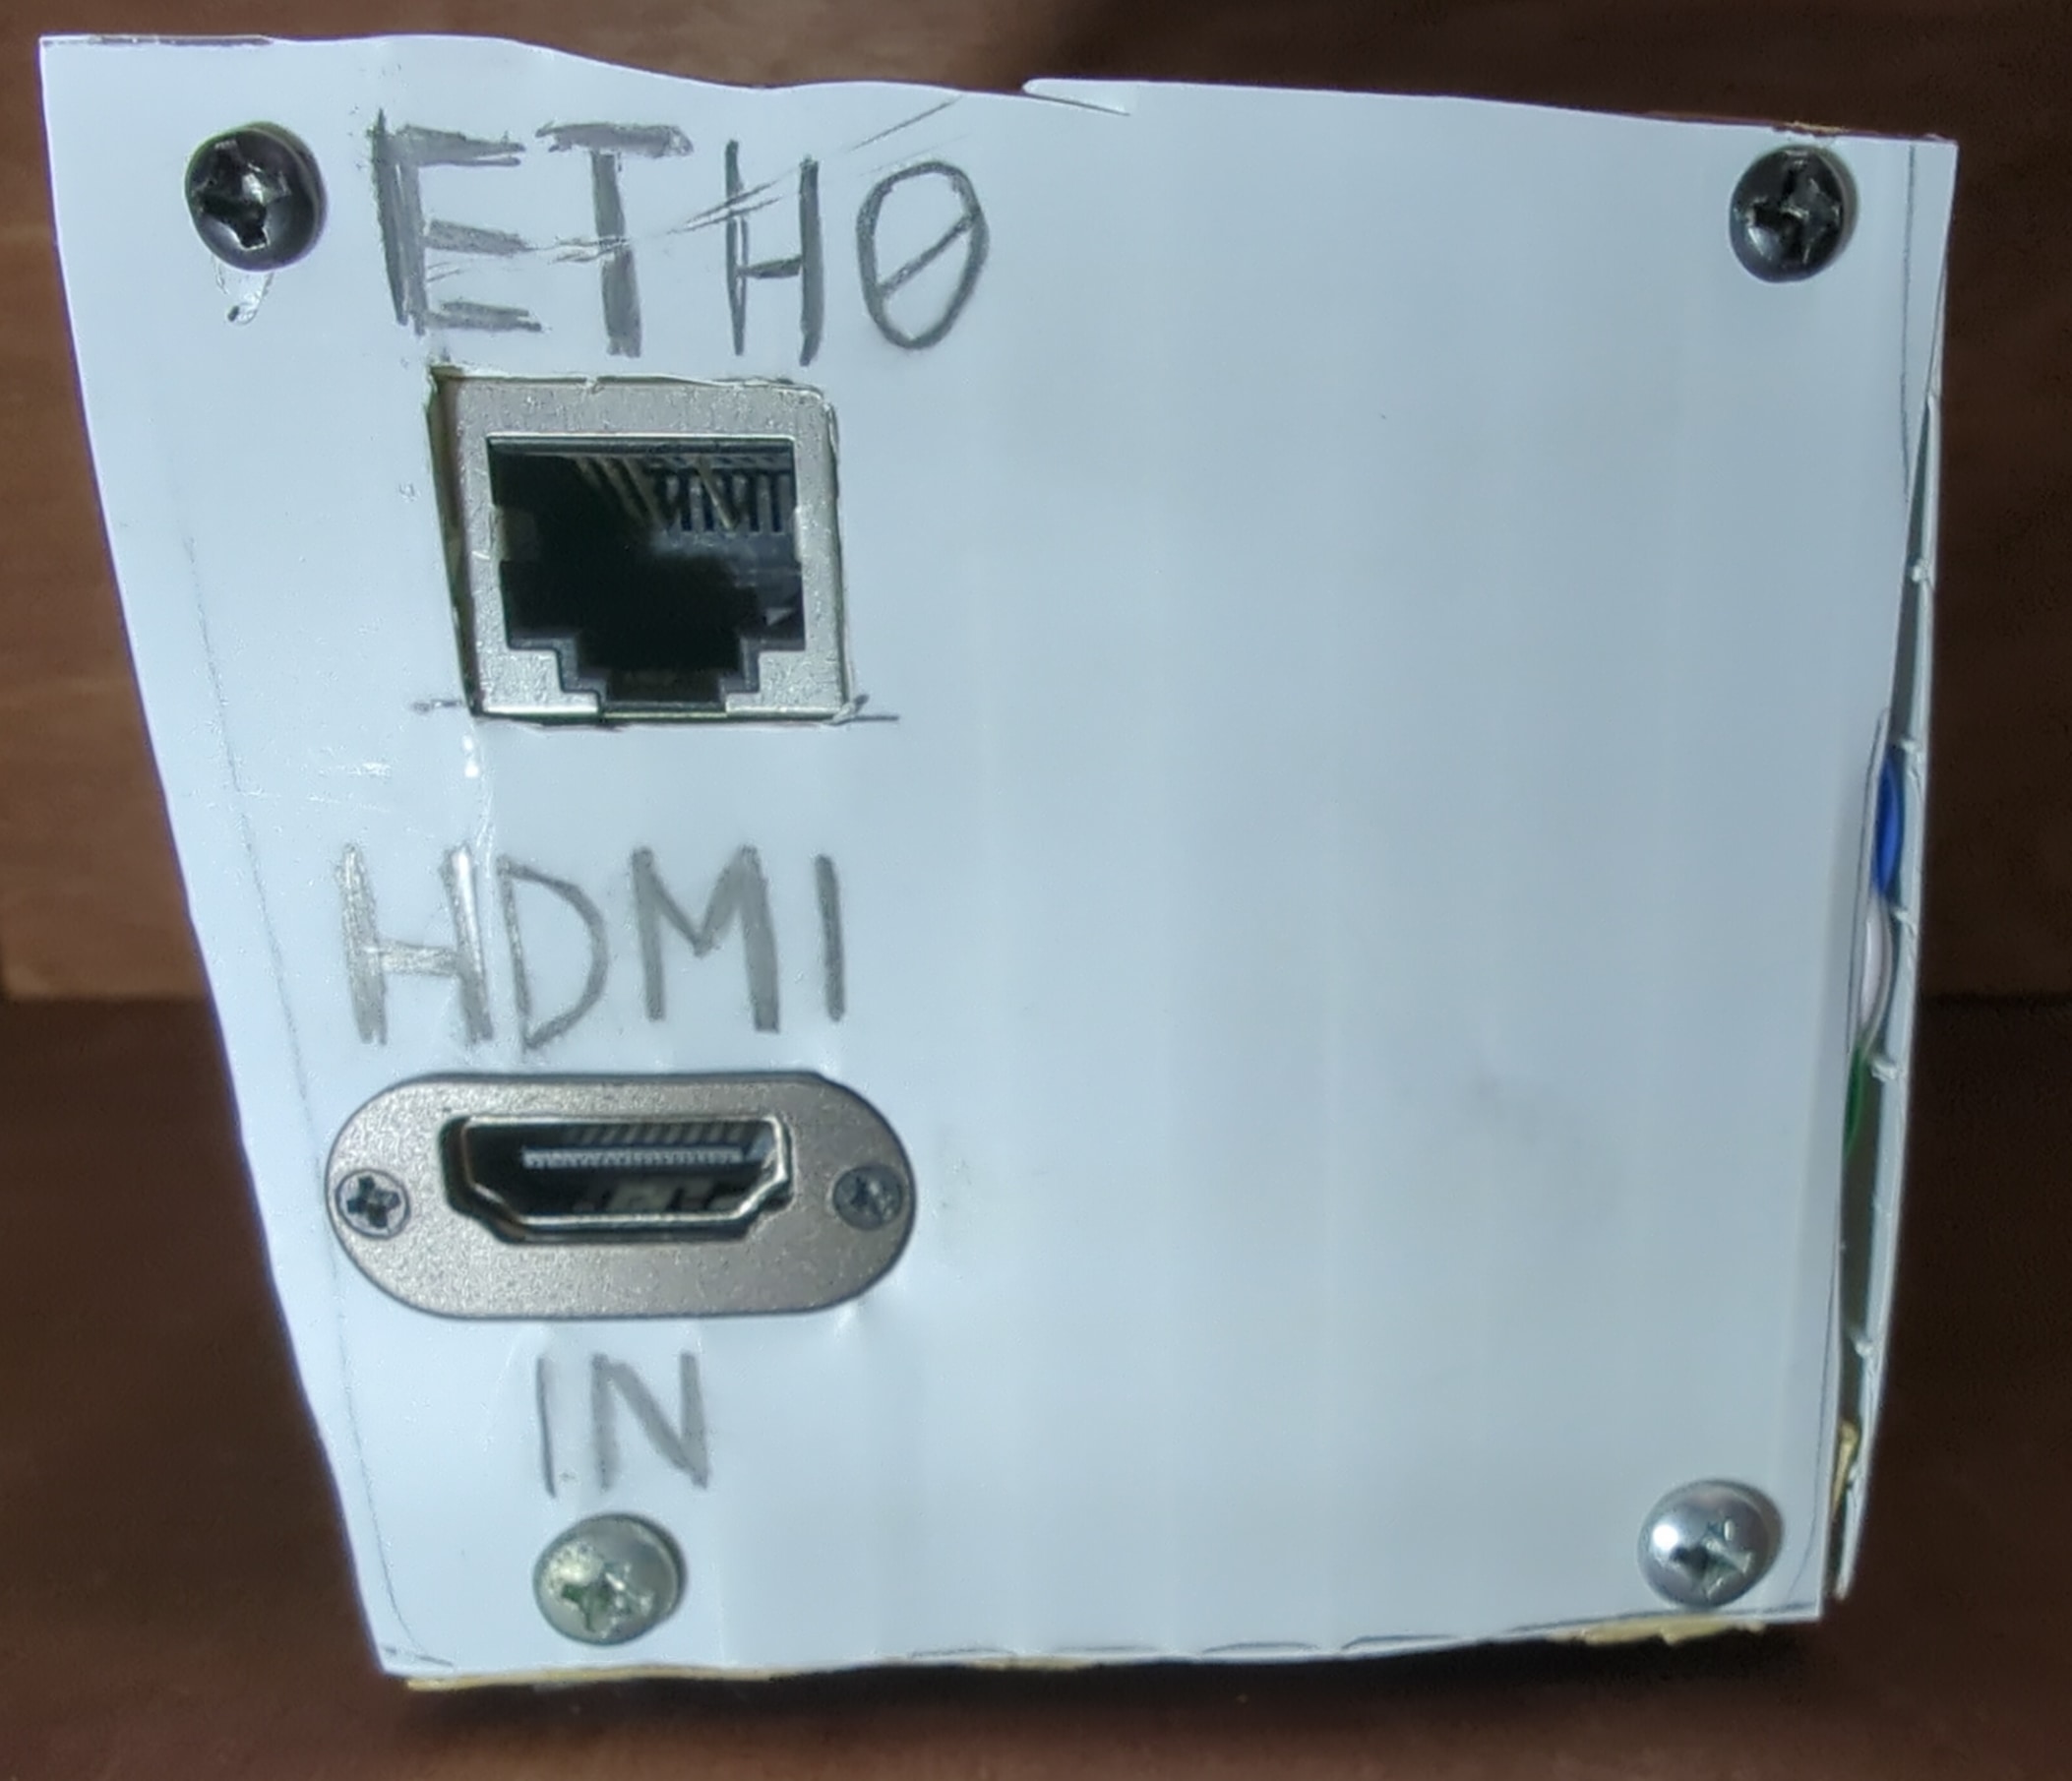 Ethernet RJ-45 and HDMI Input ports mounted on the side of the custom case.